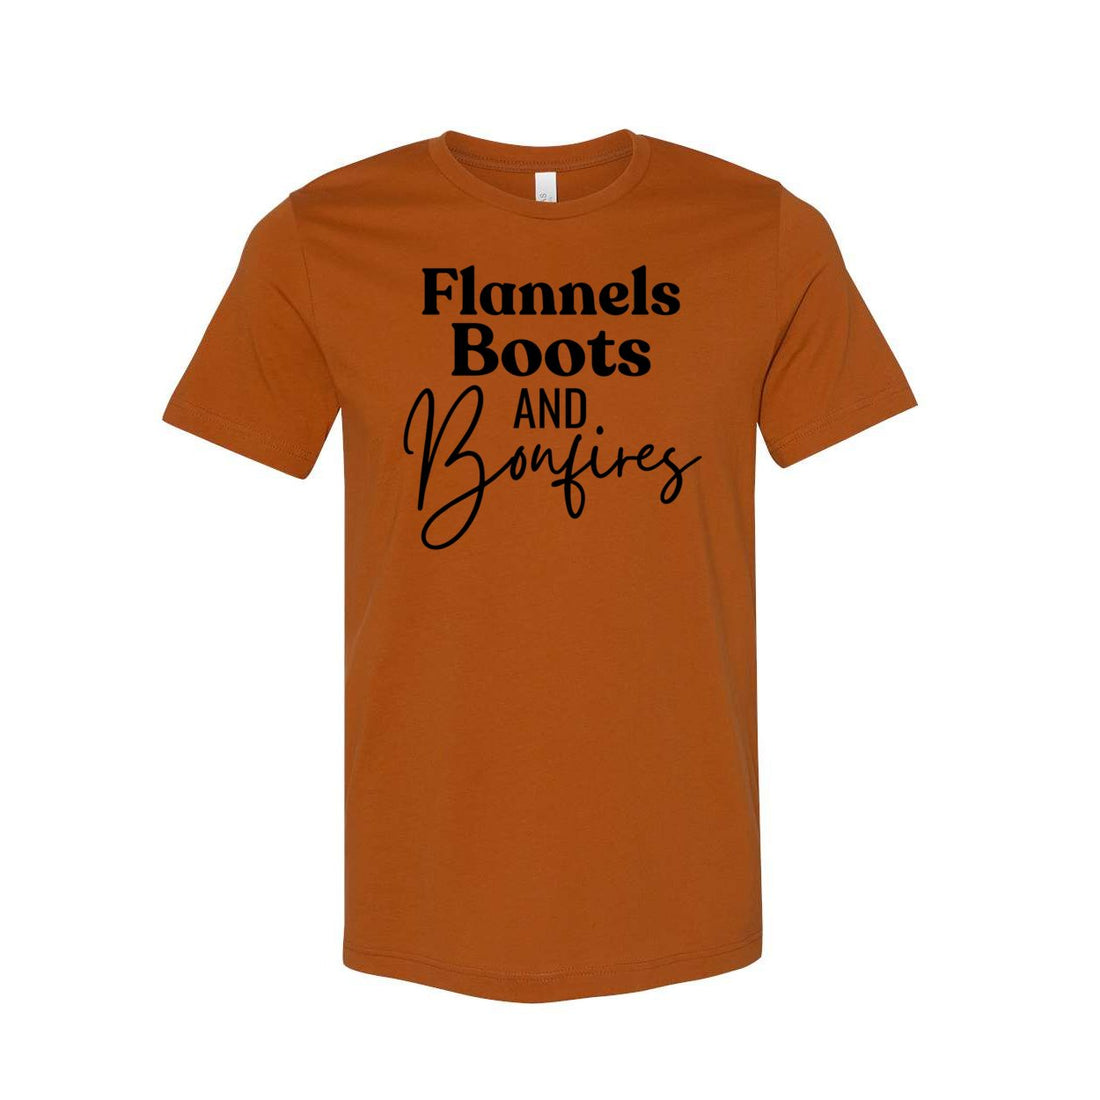 Flannel Boots and Bonfires - T-Shirts - Positively Sassy - Flannel Boots and Bonfires